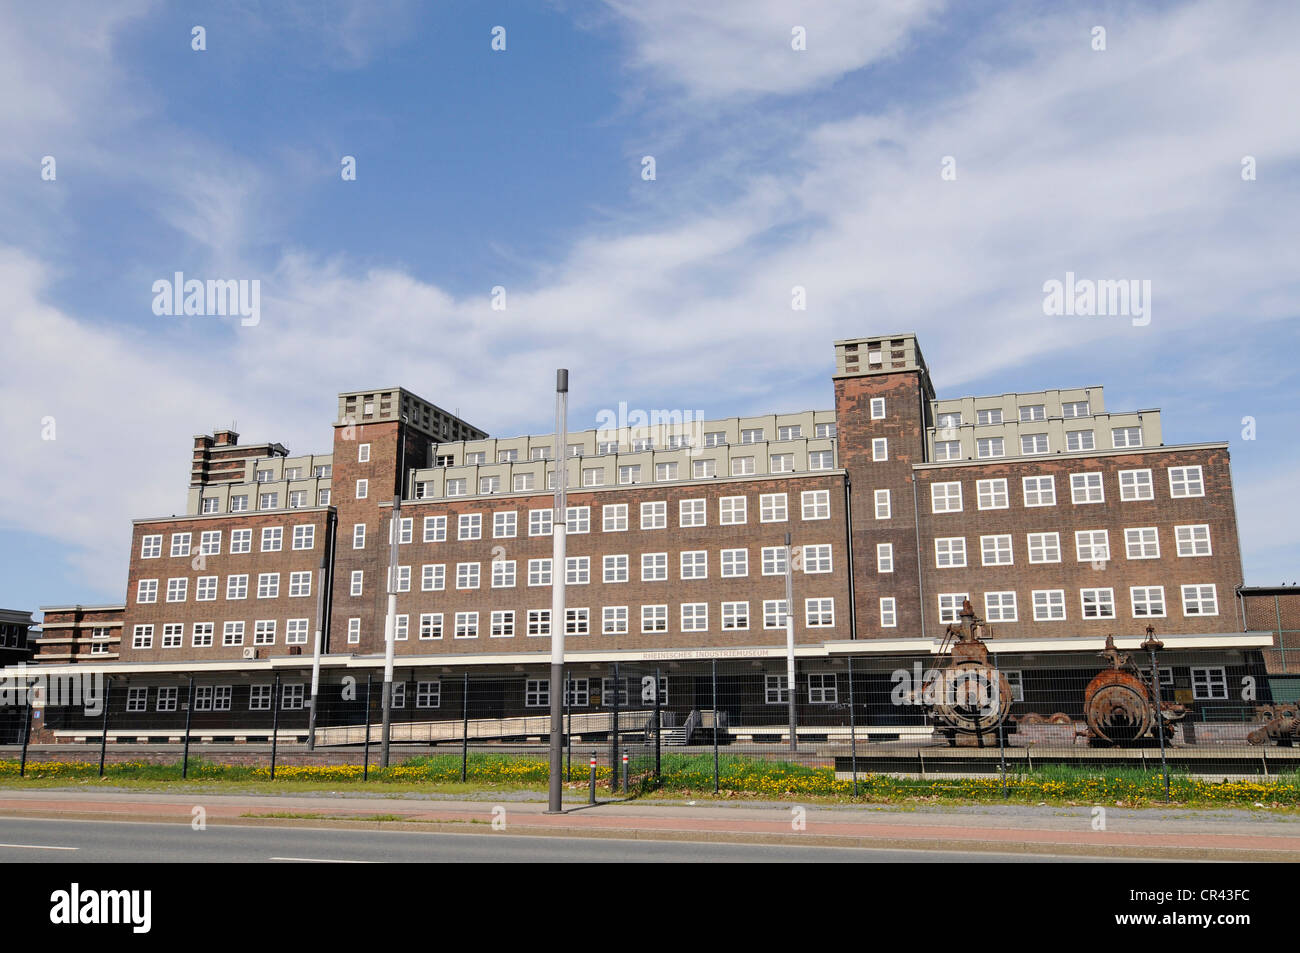 Peter-Behrens-Bau building, LVR industrial museum, industrial monument, central repository of the Rhineland Industrial Museum in Stock Photo